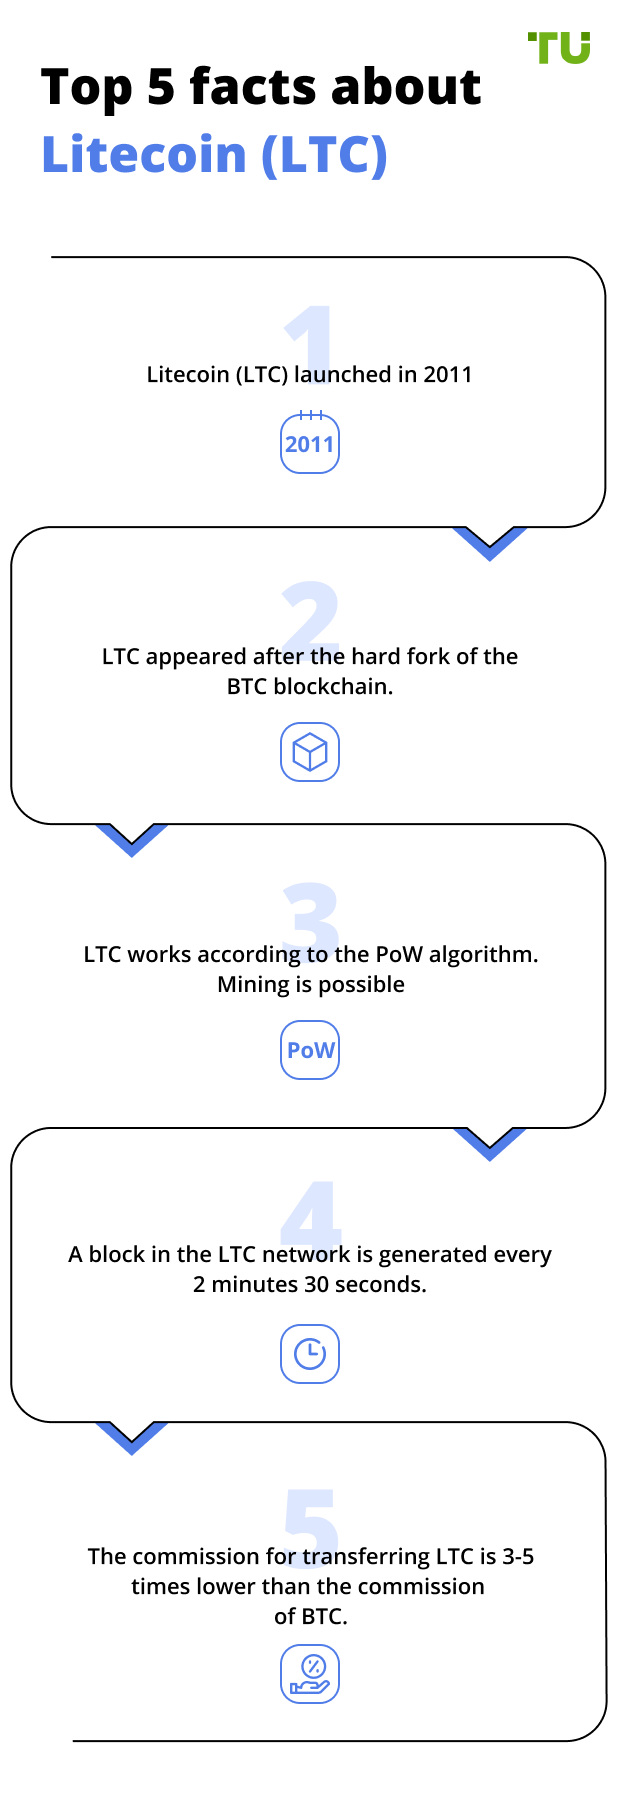 Top 5 facts about Litecoin (LTC)